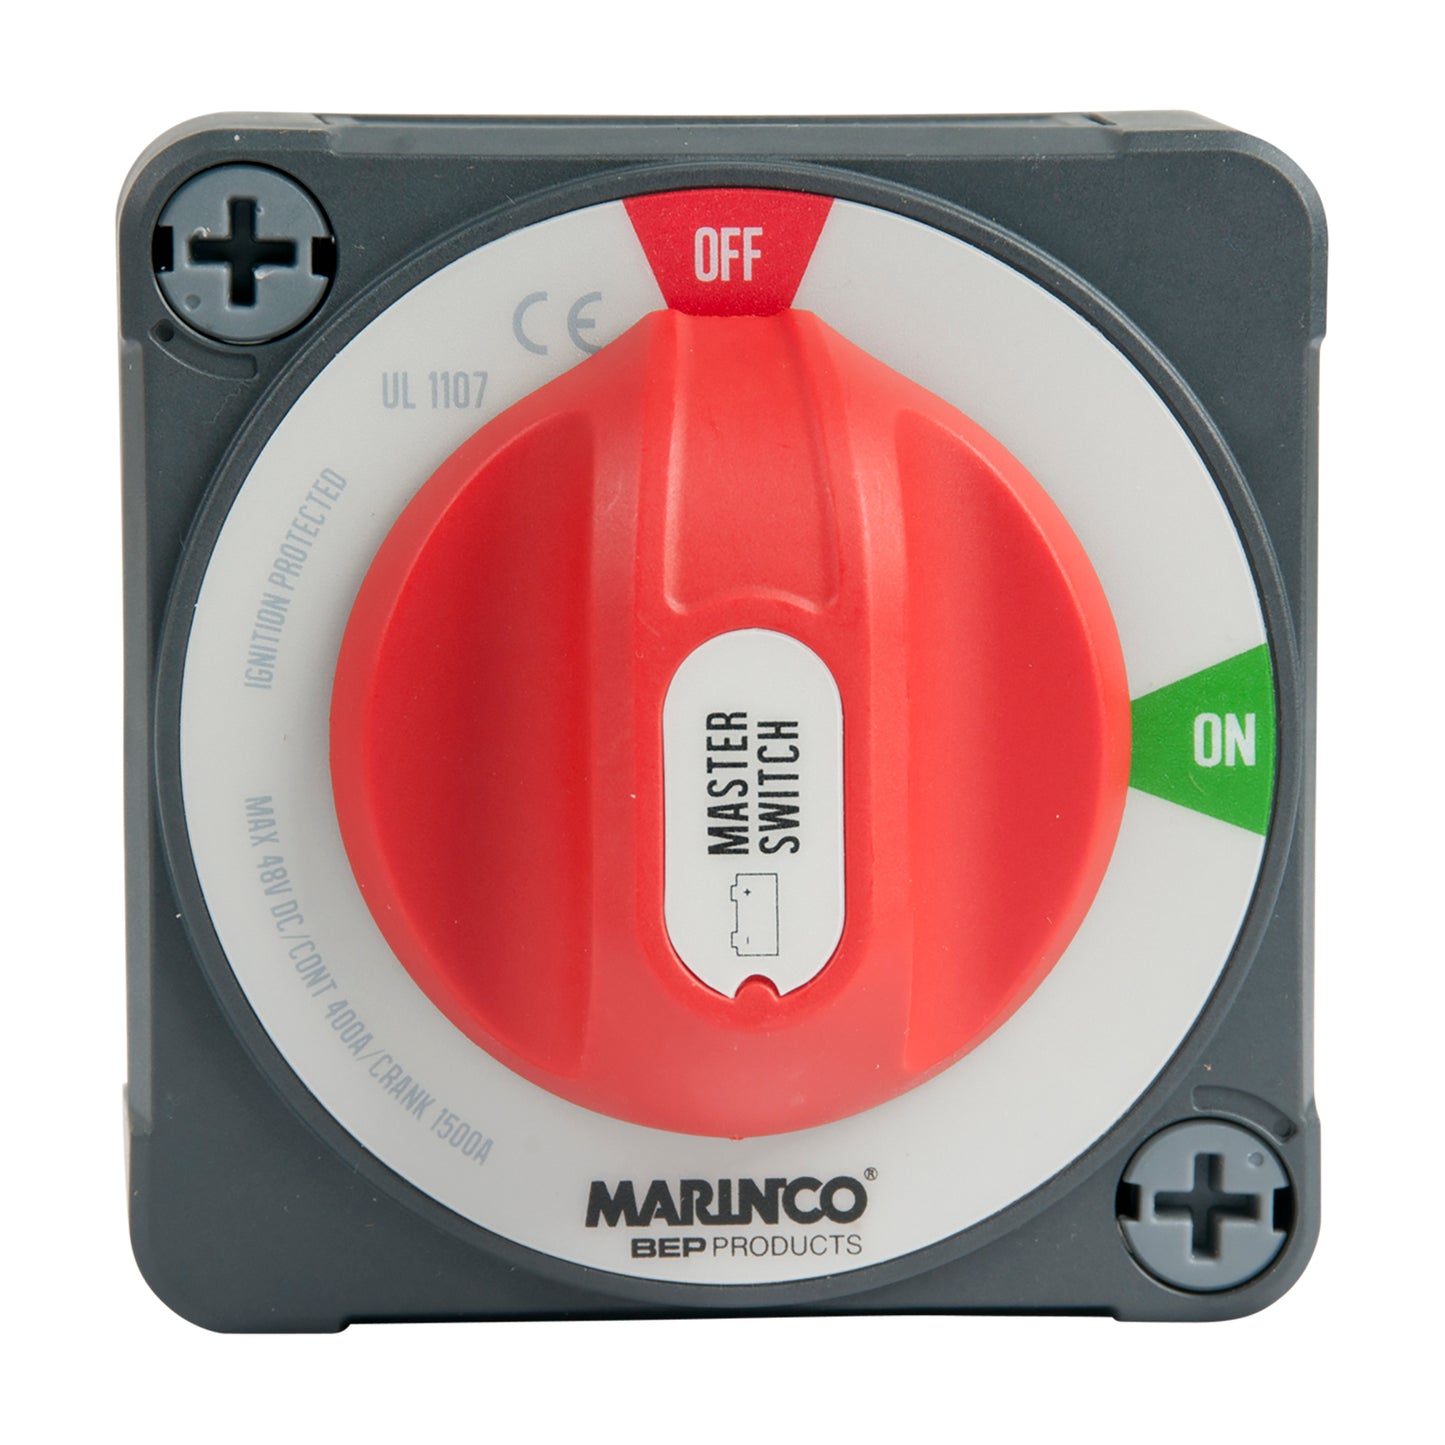 Pro Installer 400A EZ-Mount Battery Selector Switch (1-2-Both-Off)